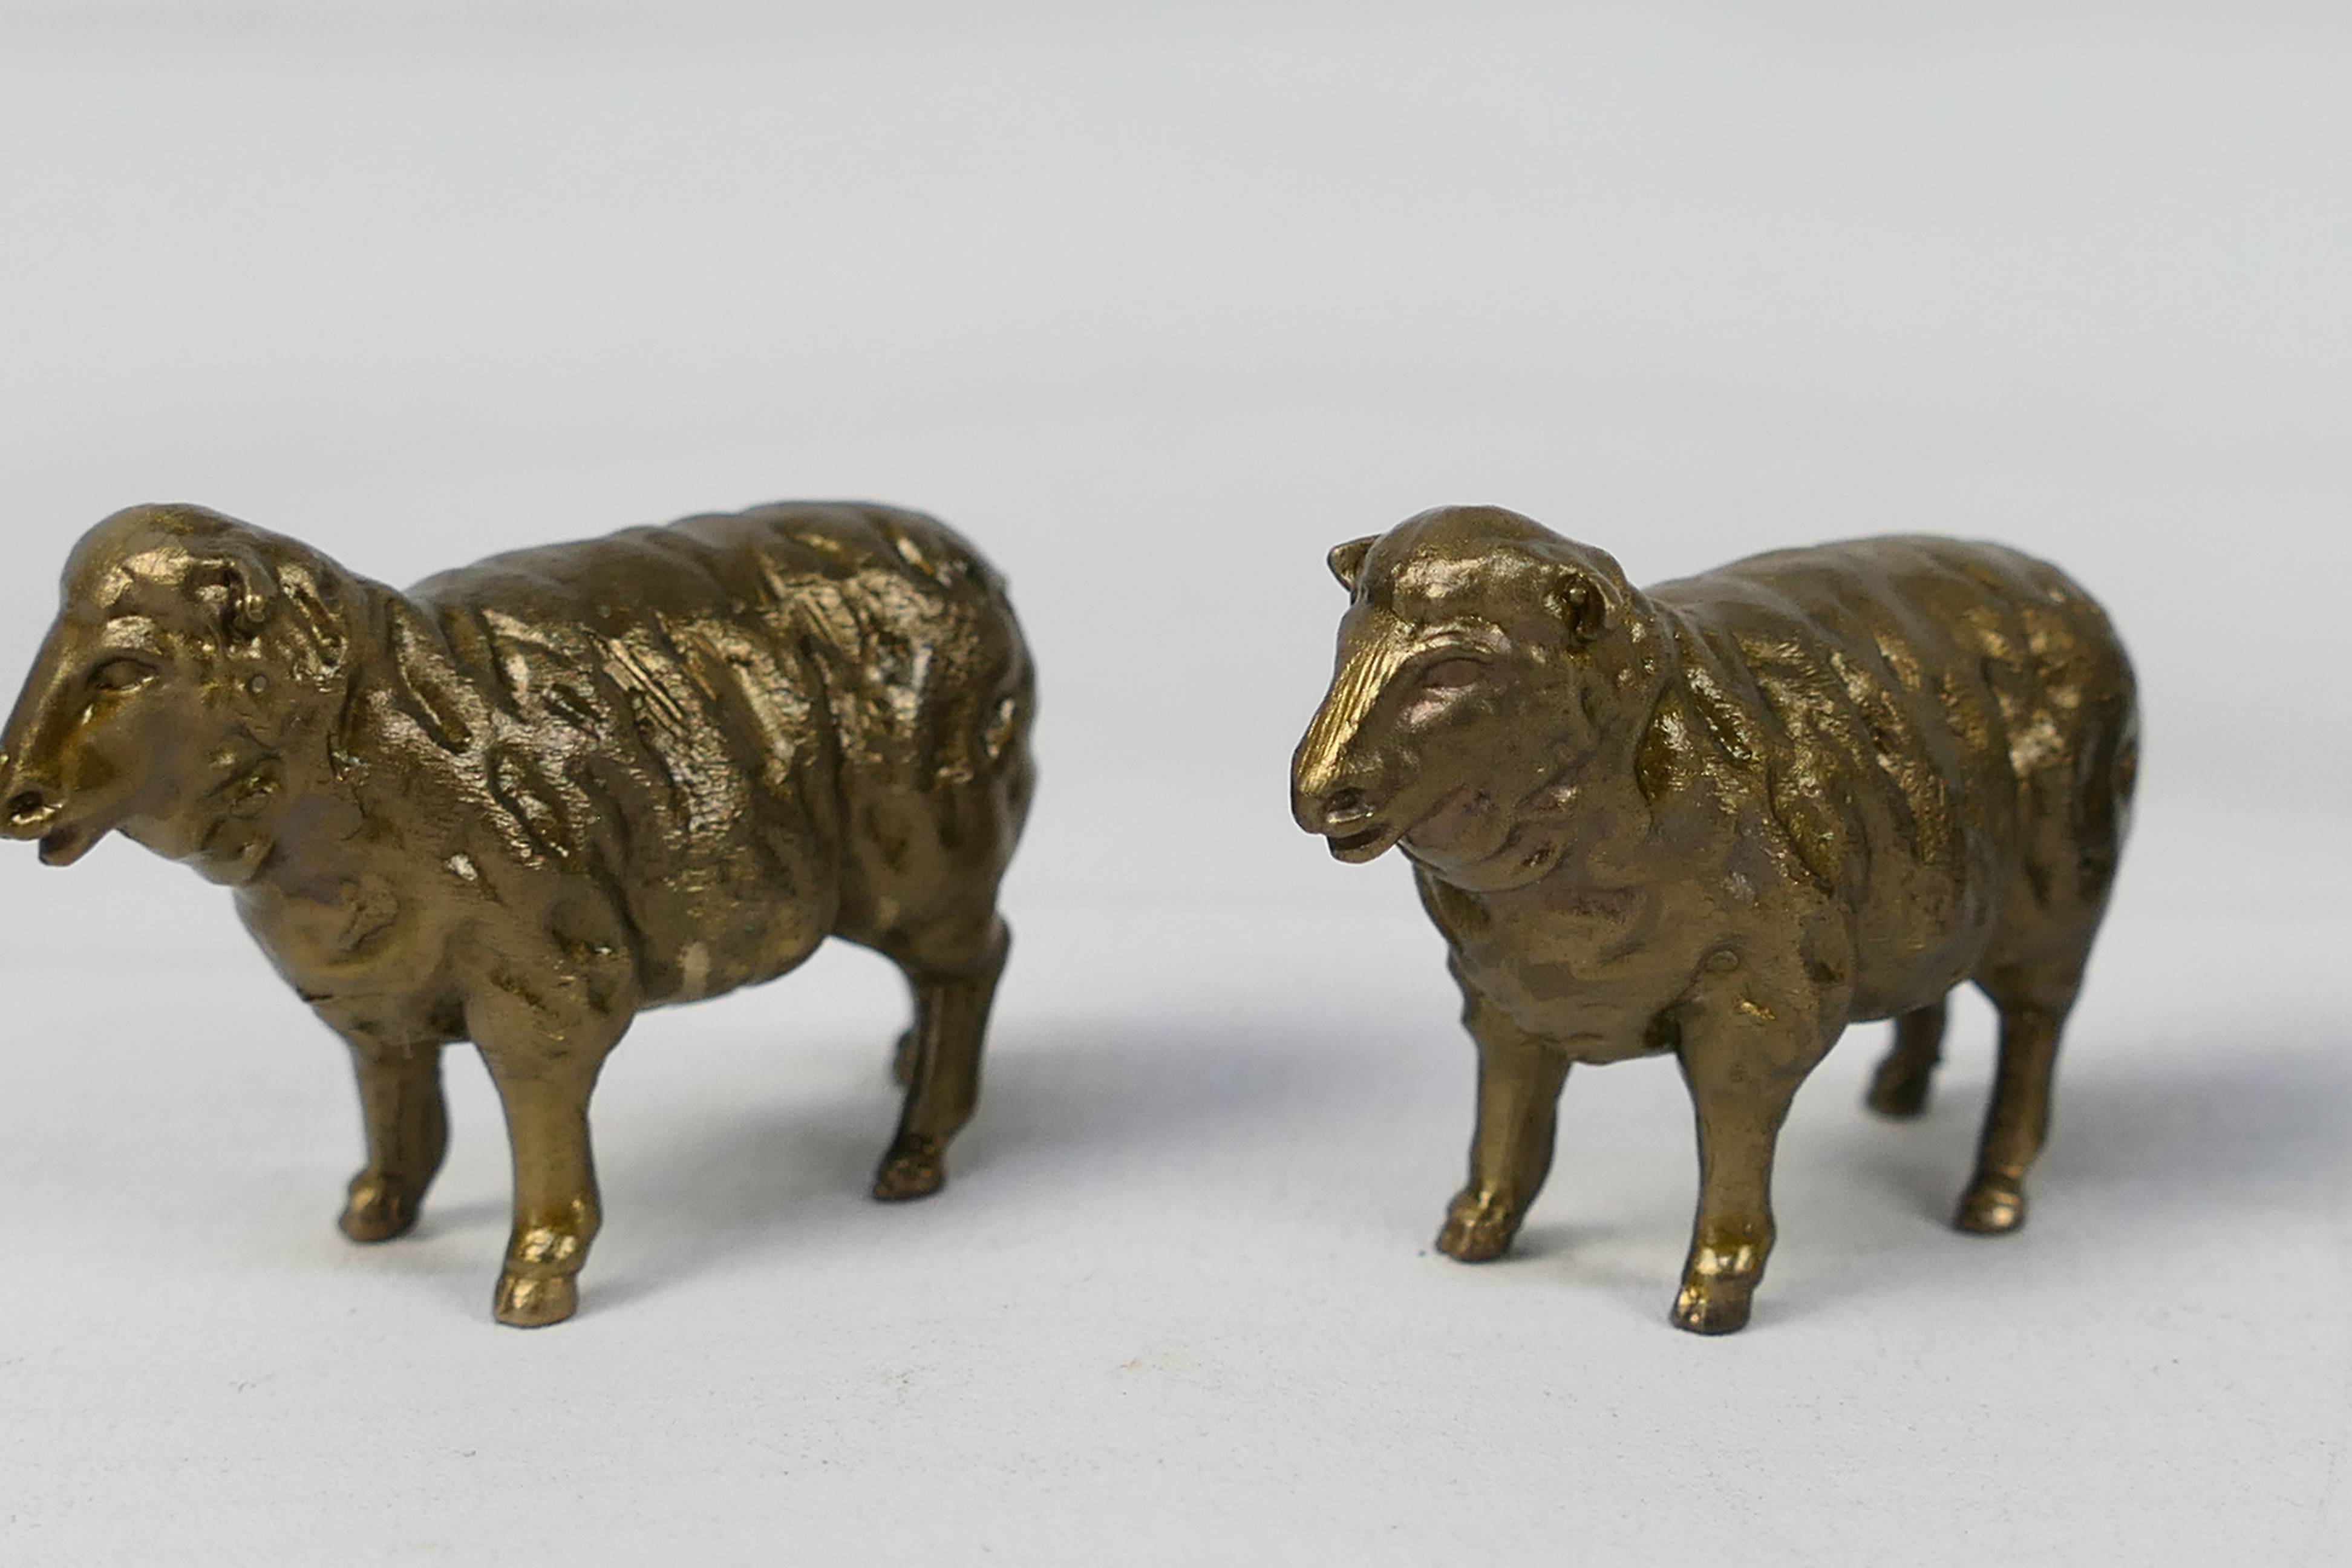 8 x bronze sheep figures. All in same si - Image 4 of 6